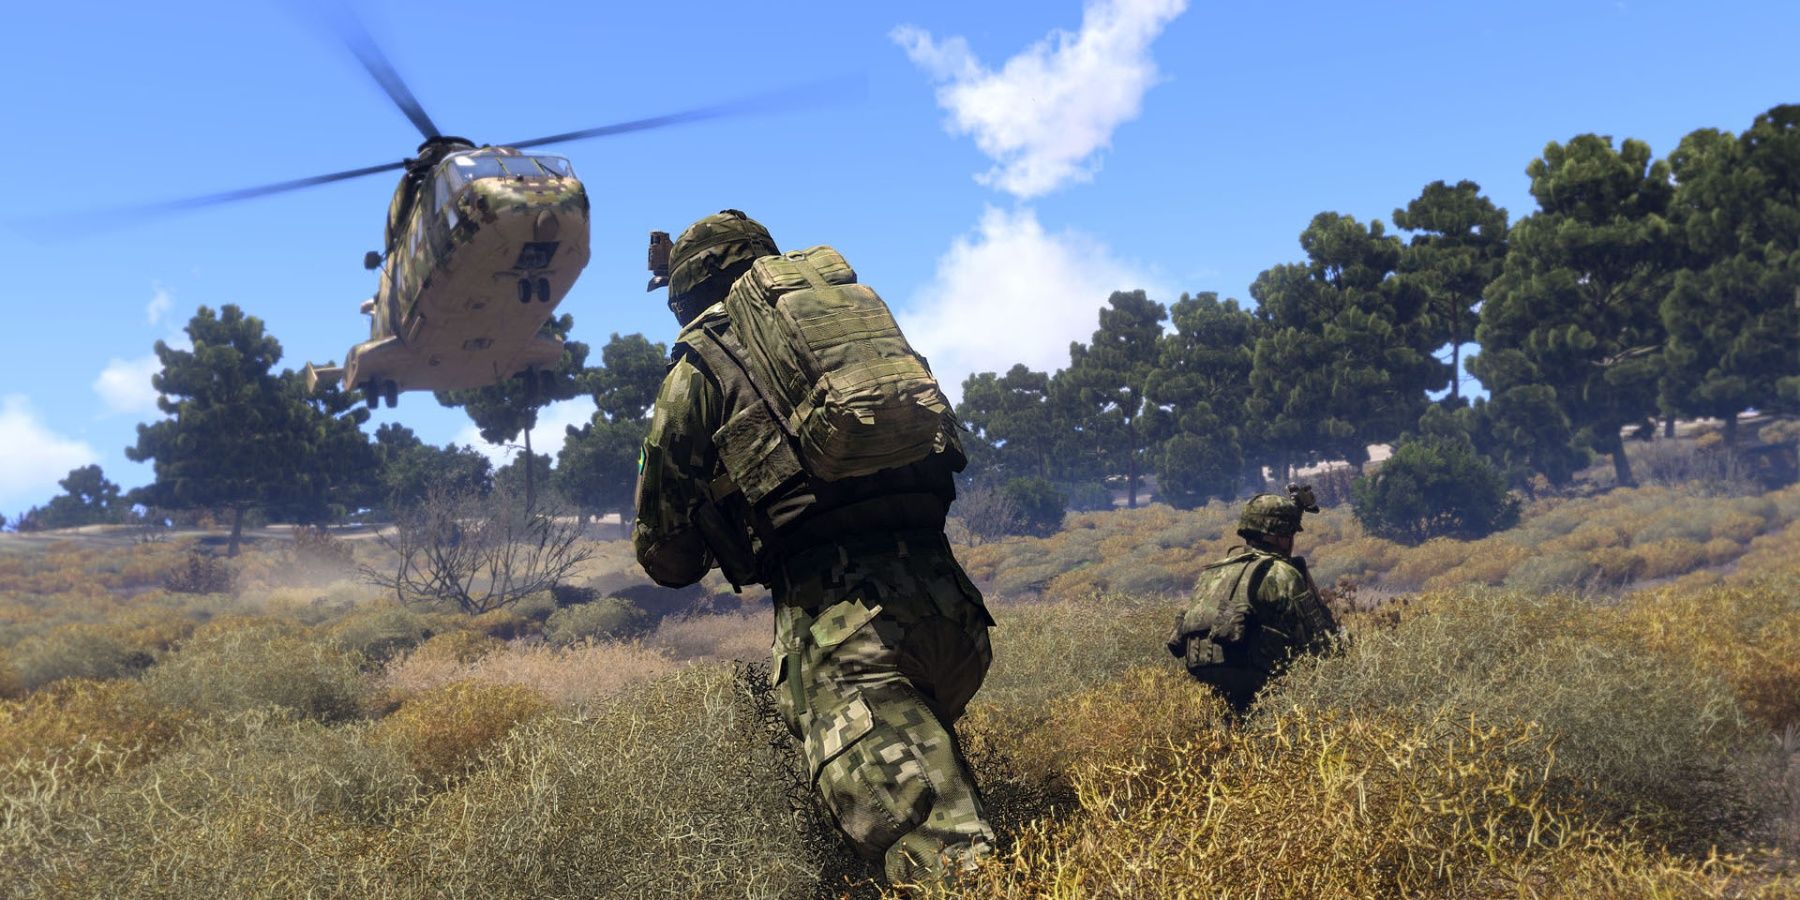 Arma 3 - Helicopter and Soldiers in a Field